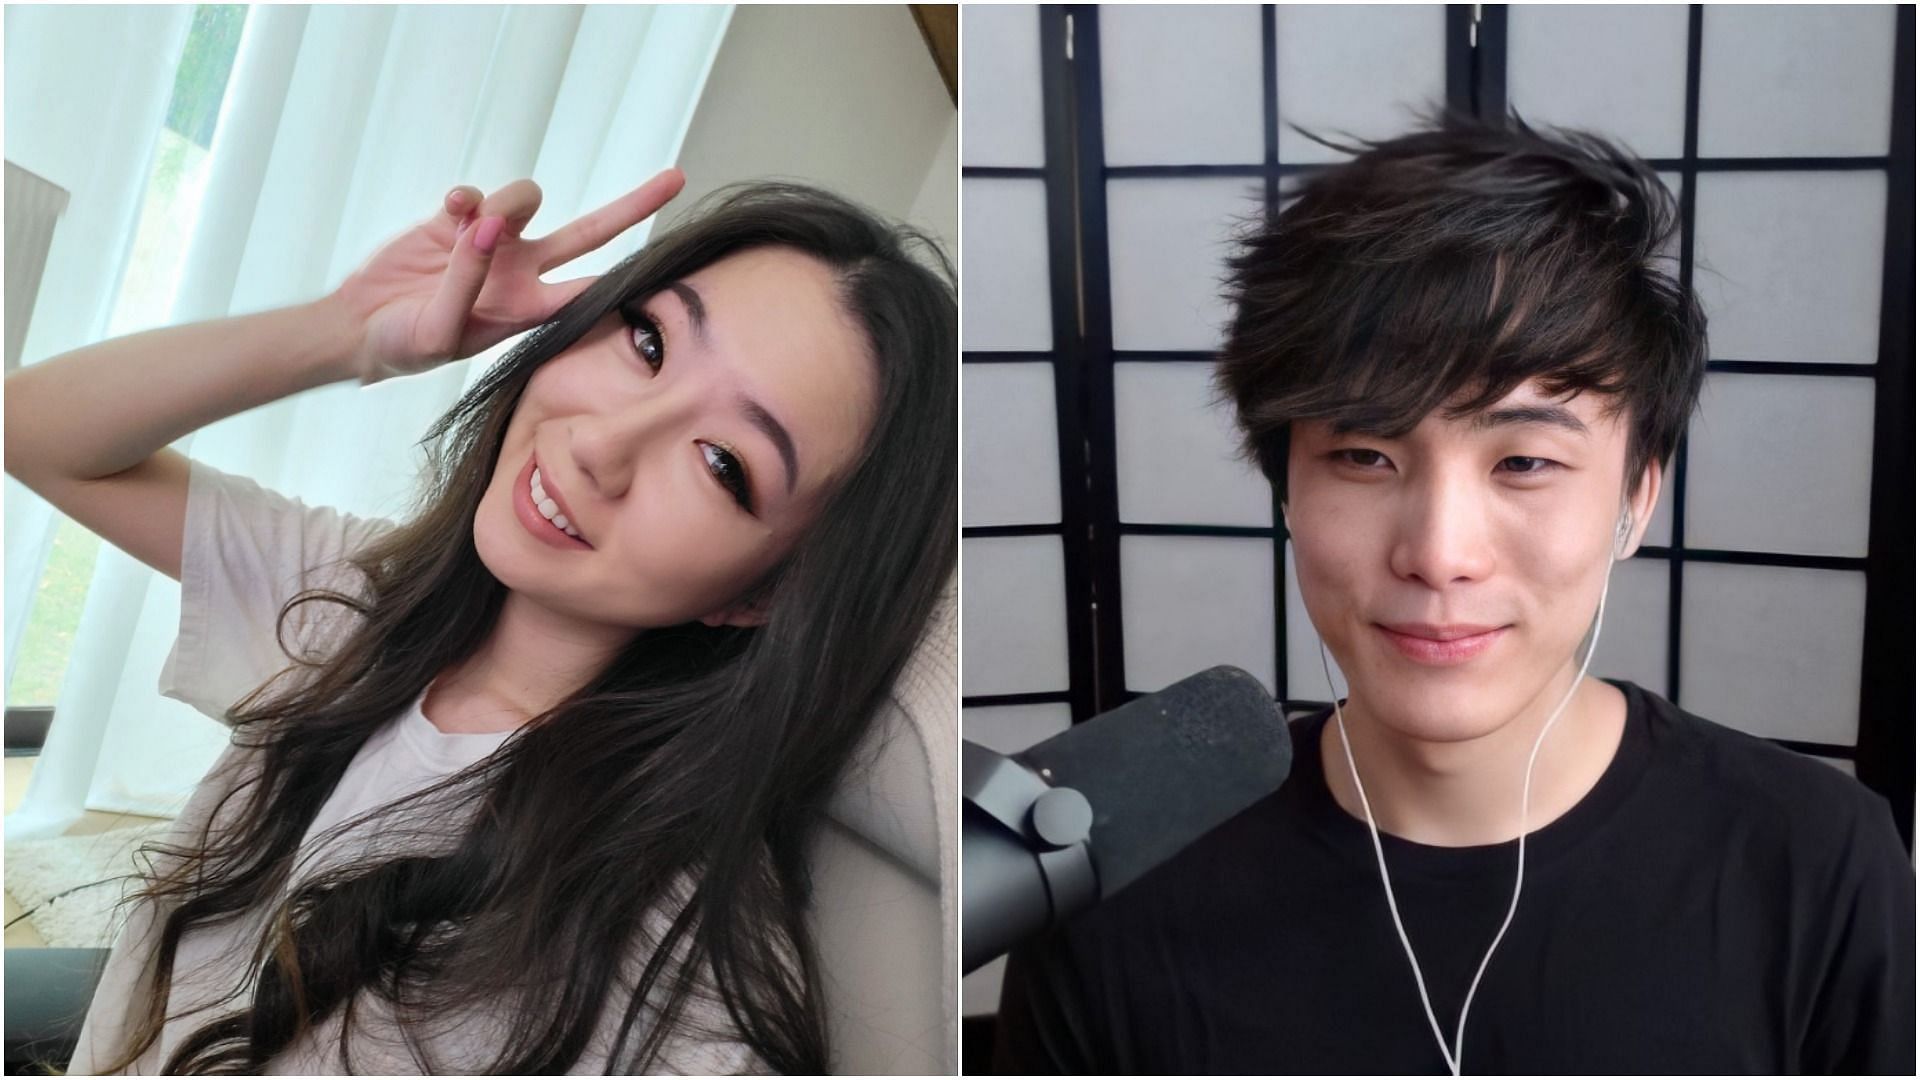 Fuslie announced that she and her roommates will be giving Sykkuno a makeover on stream (images via Twitter)